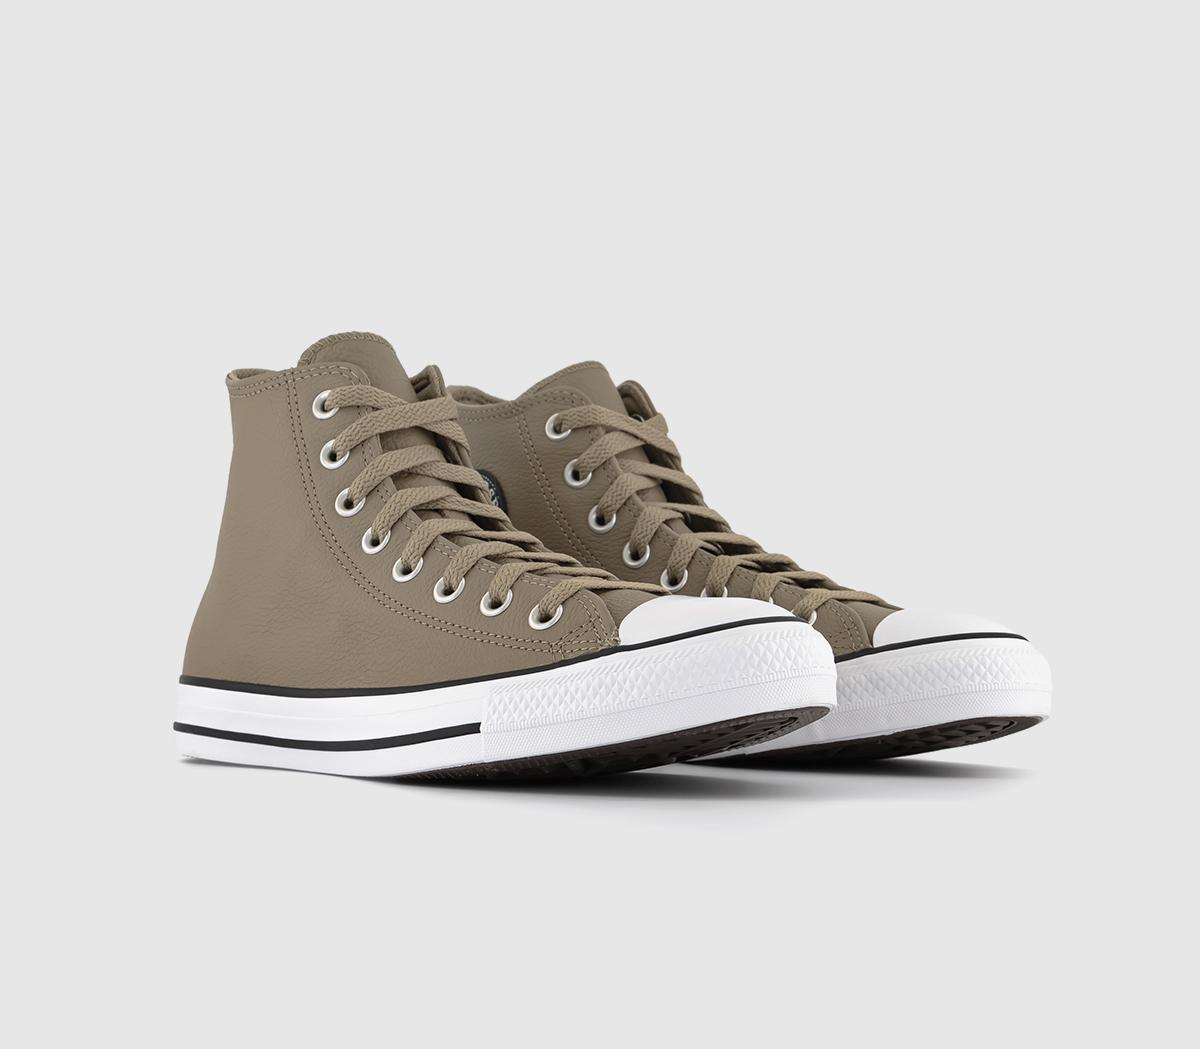 Converse All Star Hi Trainers Roasted - Women's Trainers